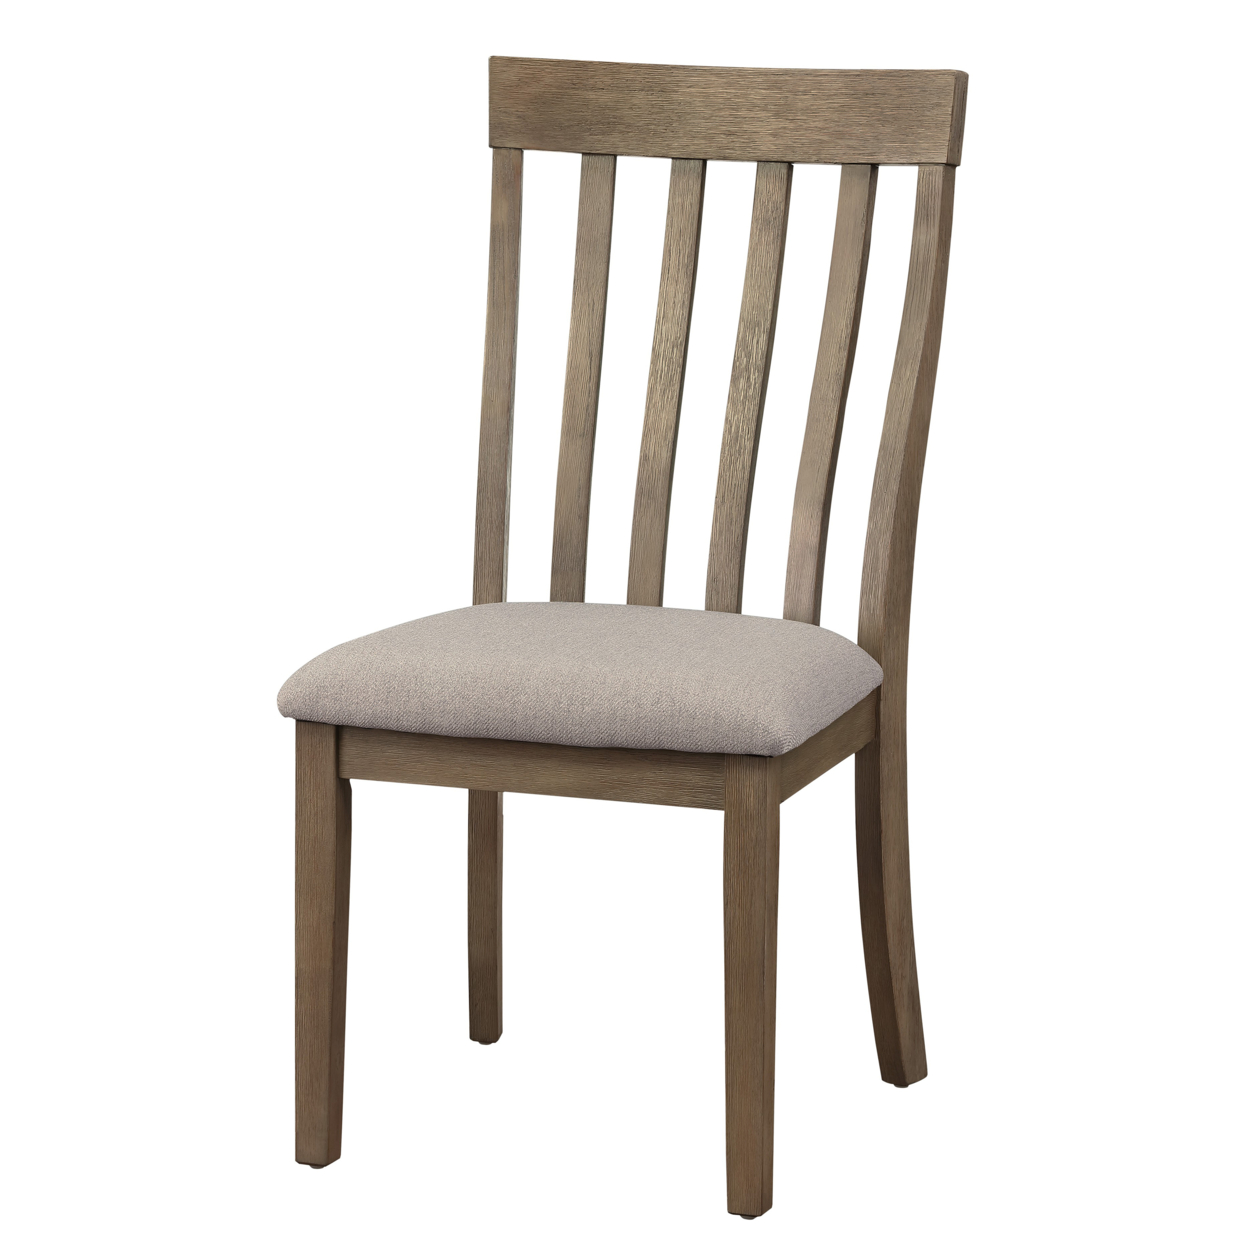 Vertical Slatted Curved Side Chair With Fabric Seat,Set Of 2,Brown And Gray- Saltoro Sherpi